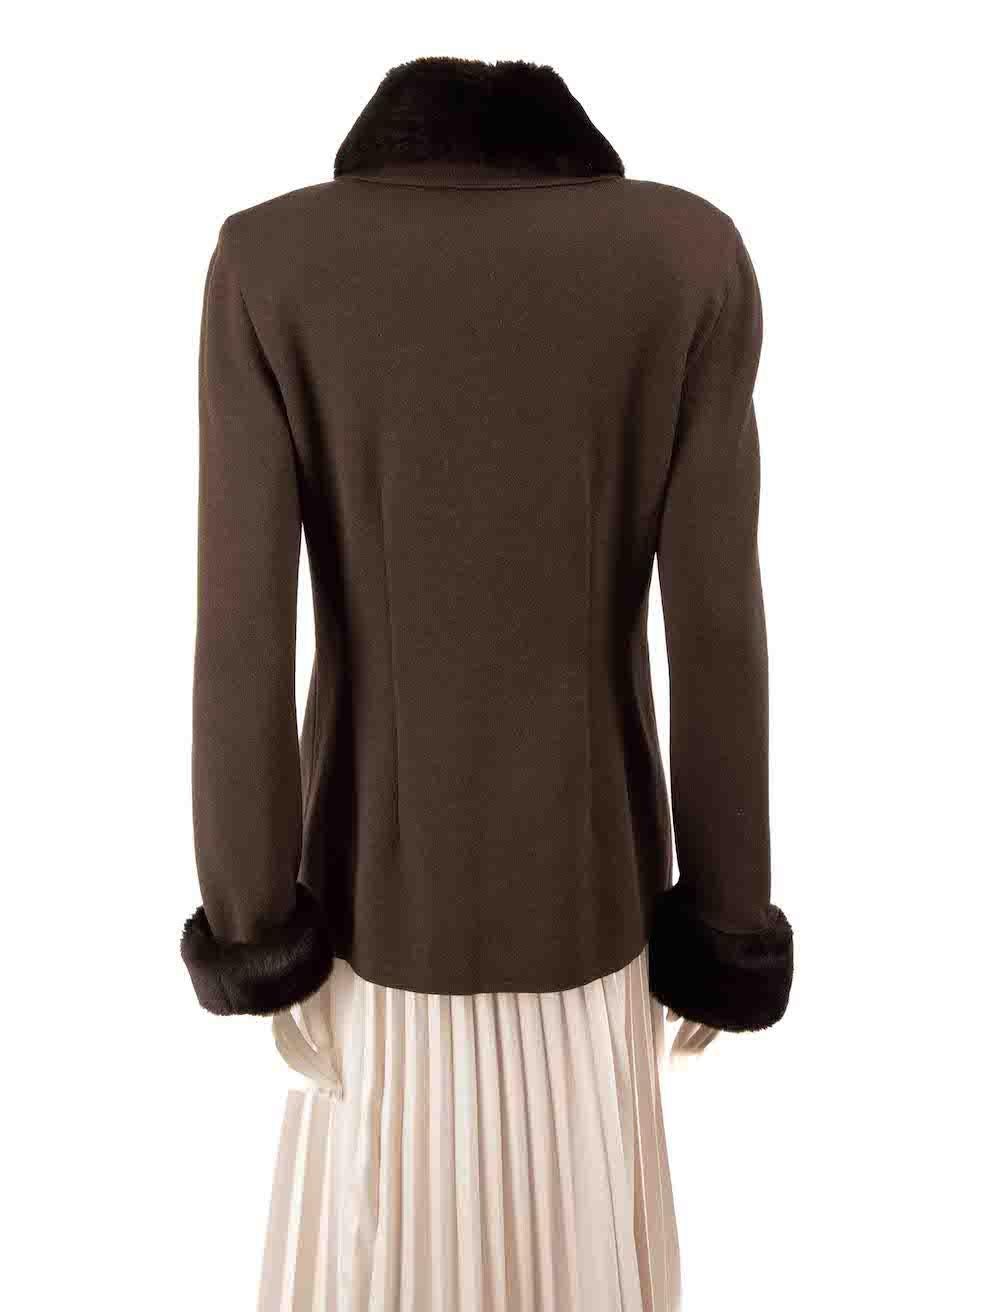 Escada Brown Wool Fur Trim Zip Jacket Size S In Excellent Condition For Sale In London, GB